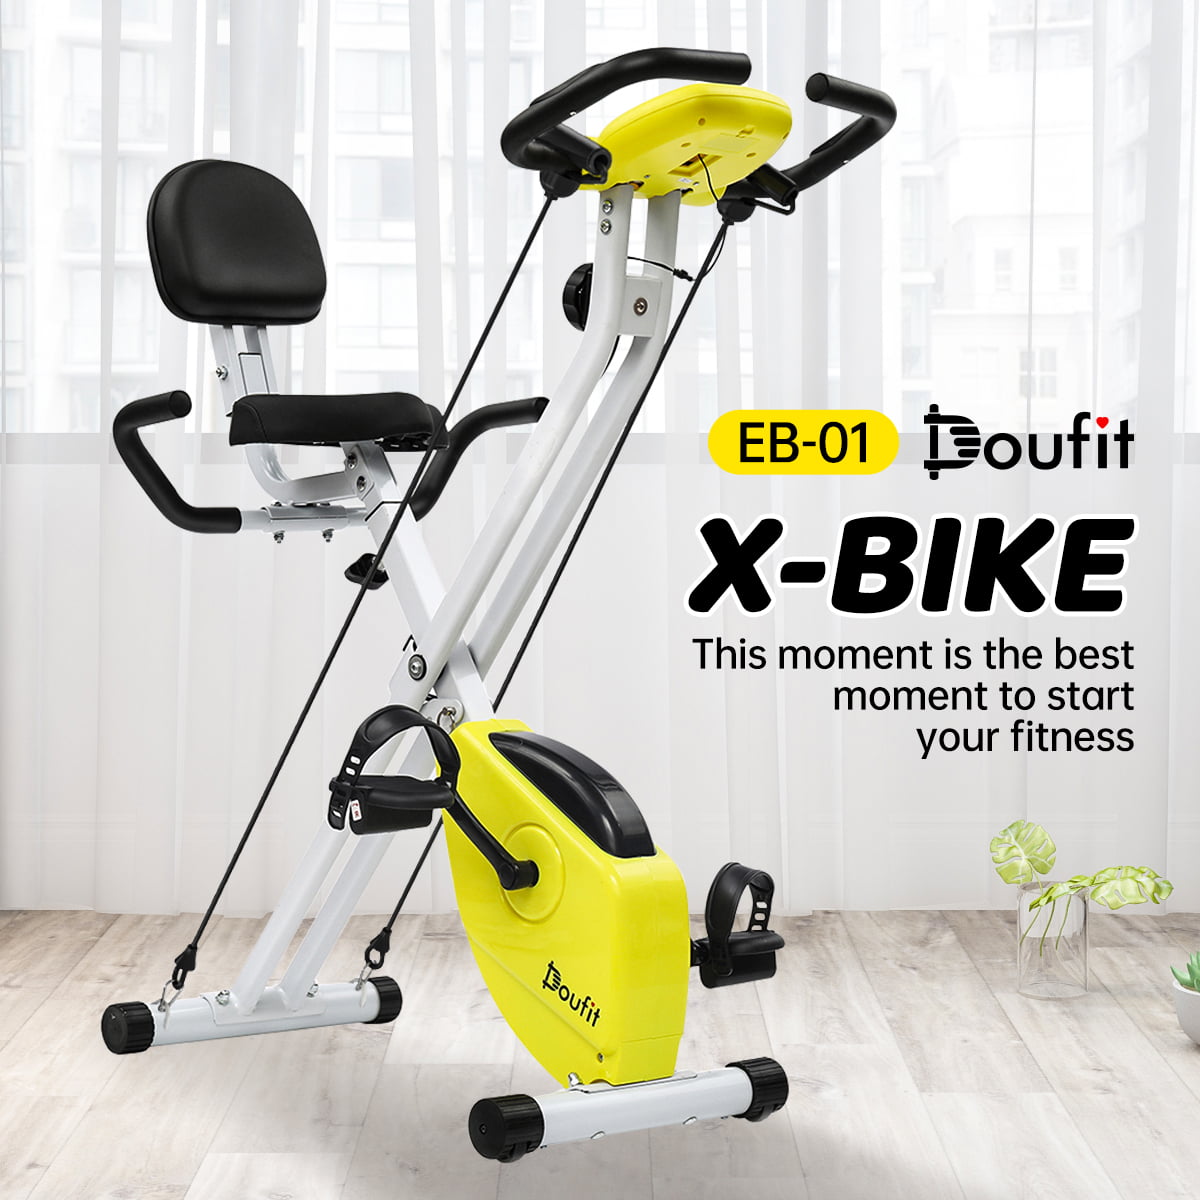 Folding Exercise Bike with Arm Workout,Upright X Bike Quite Magnetic Fitness Stationary Indoor Cycle with 8 Levels Resistance Bands